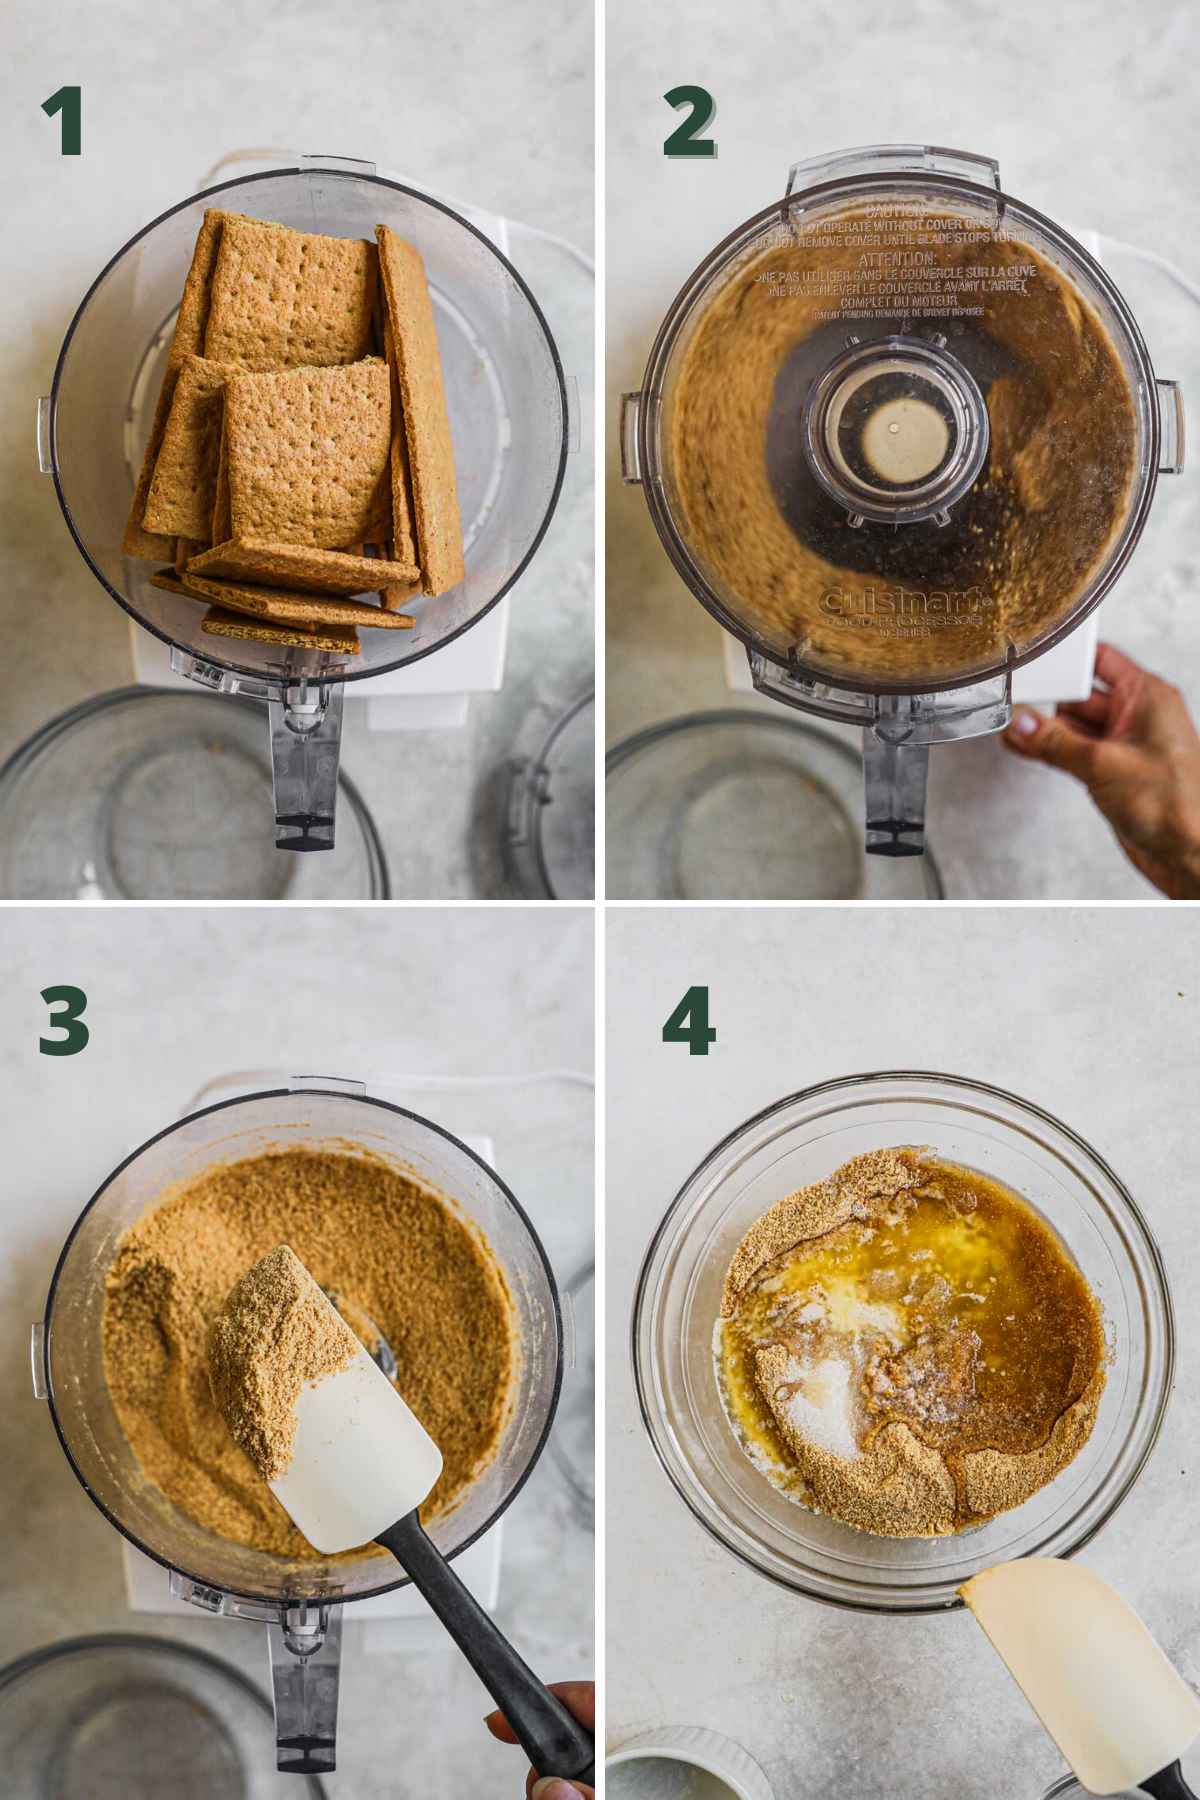 Steps to make graham cracker crust, pulsing the graham crackers into a sandy texture in a food processor, adding to a bowl with sugar and melted butter.